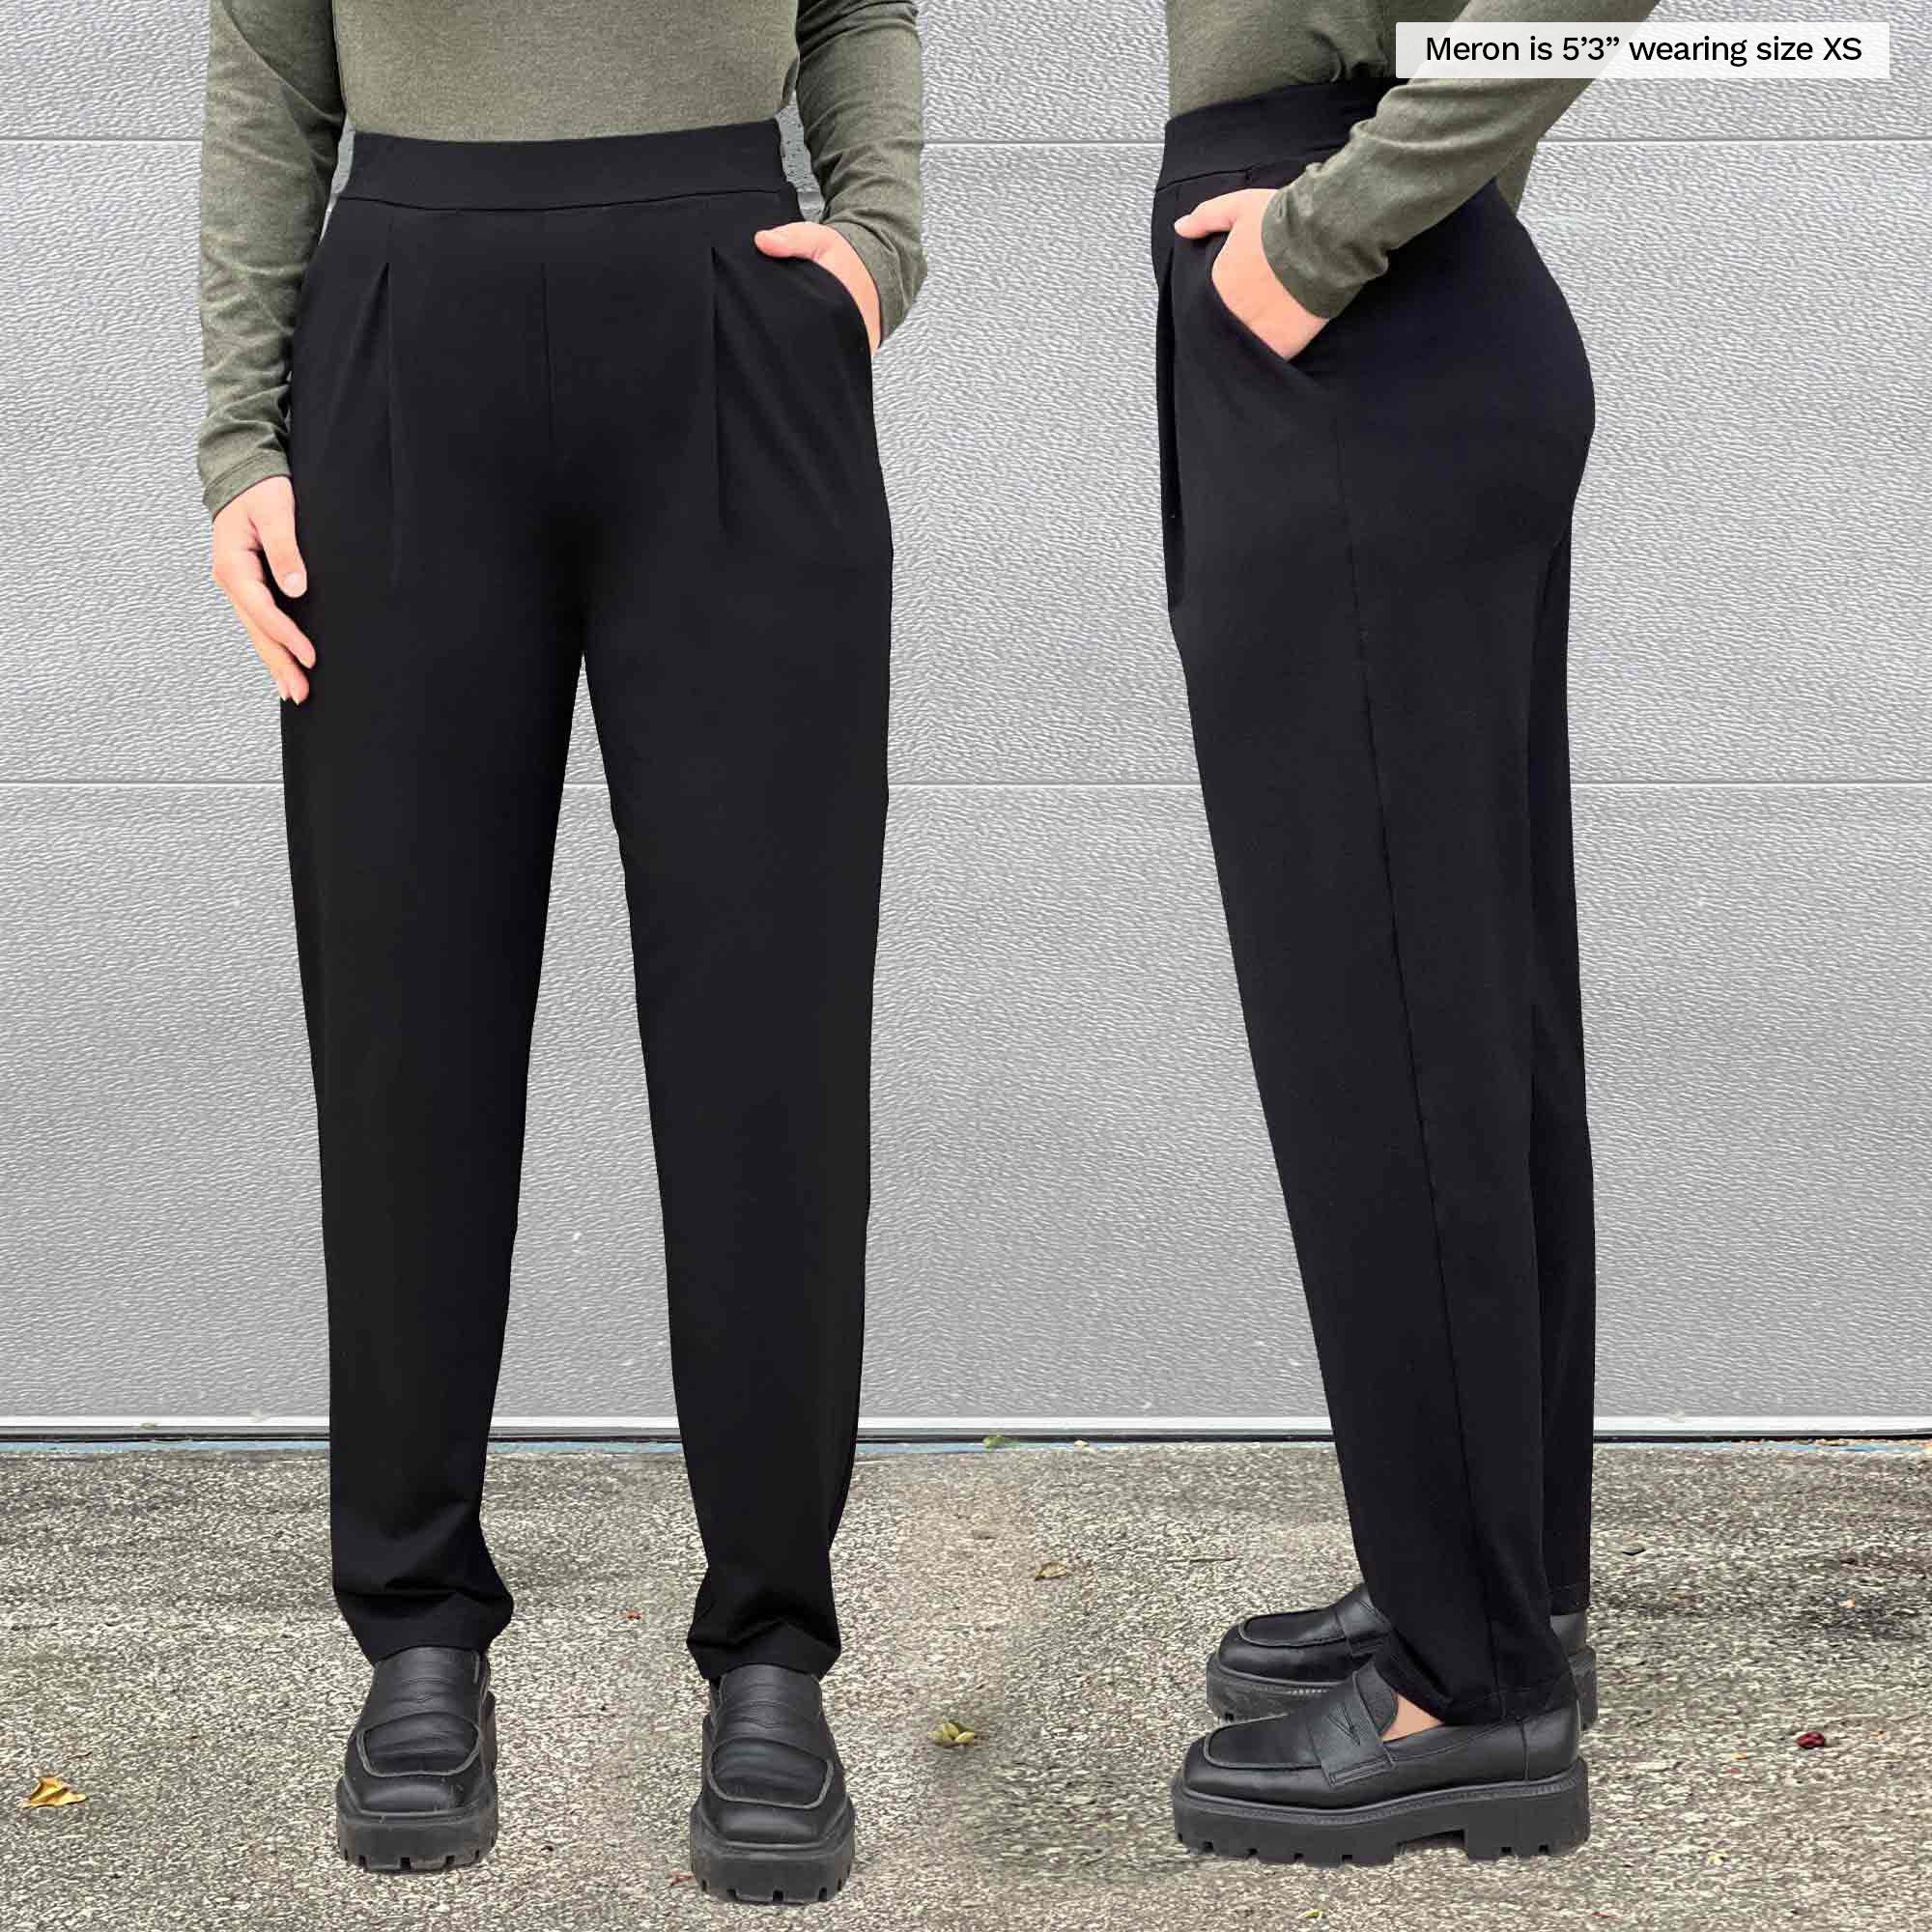 Pleat Don't Go High-Waisted Tapered Pants